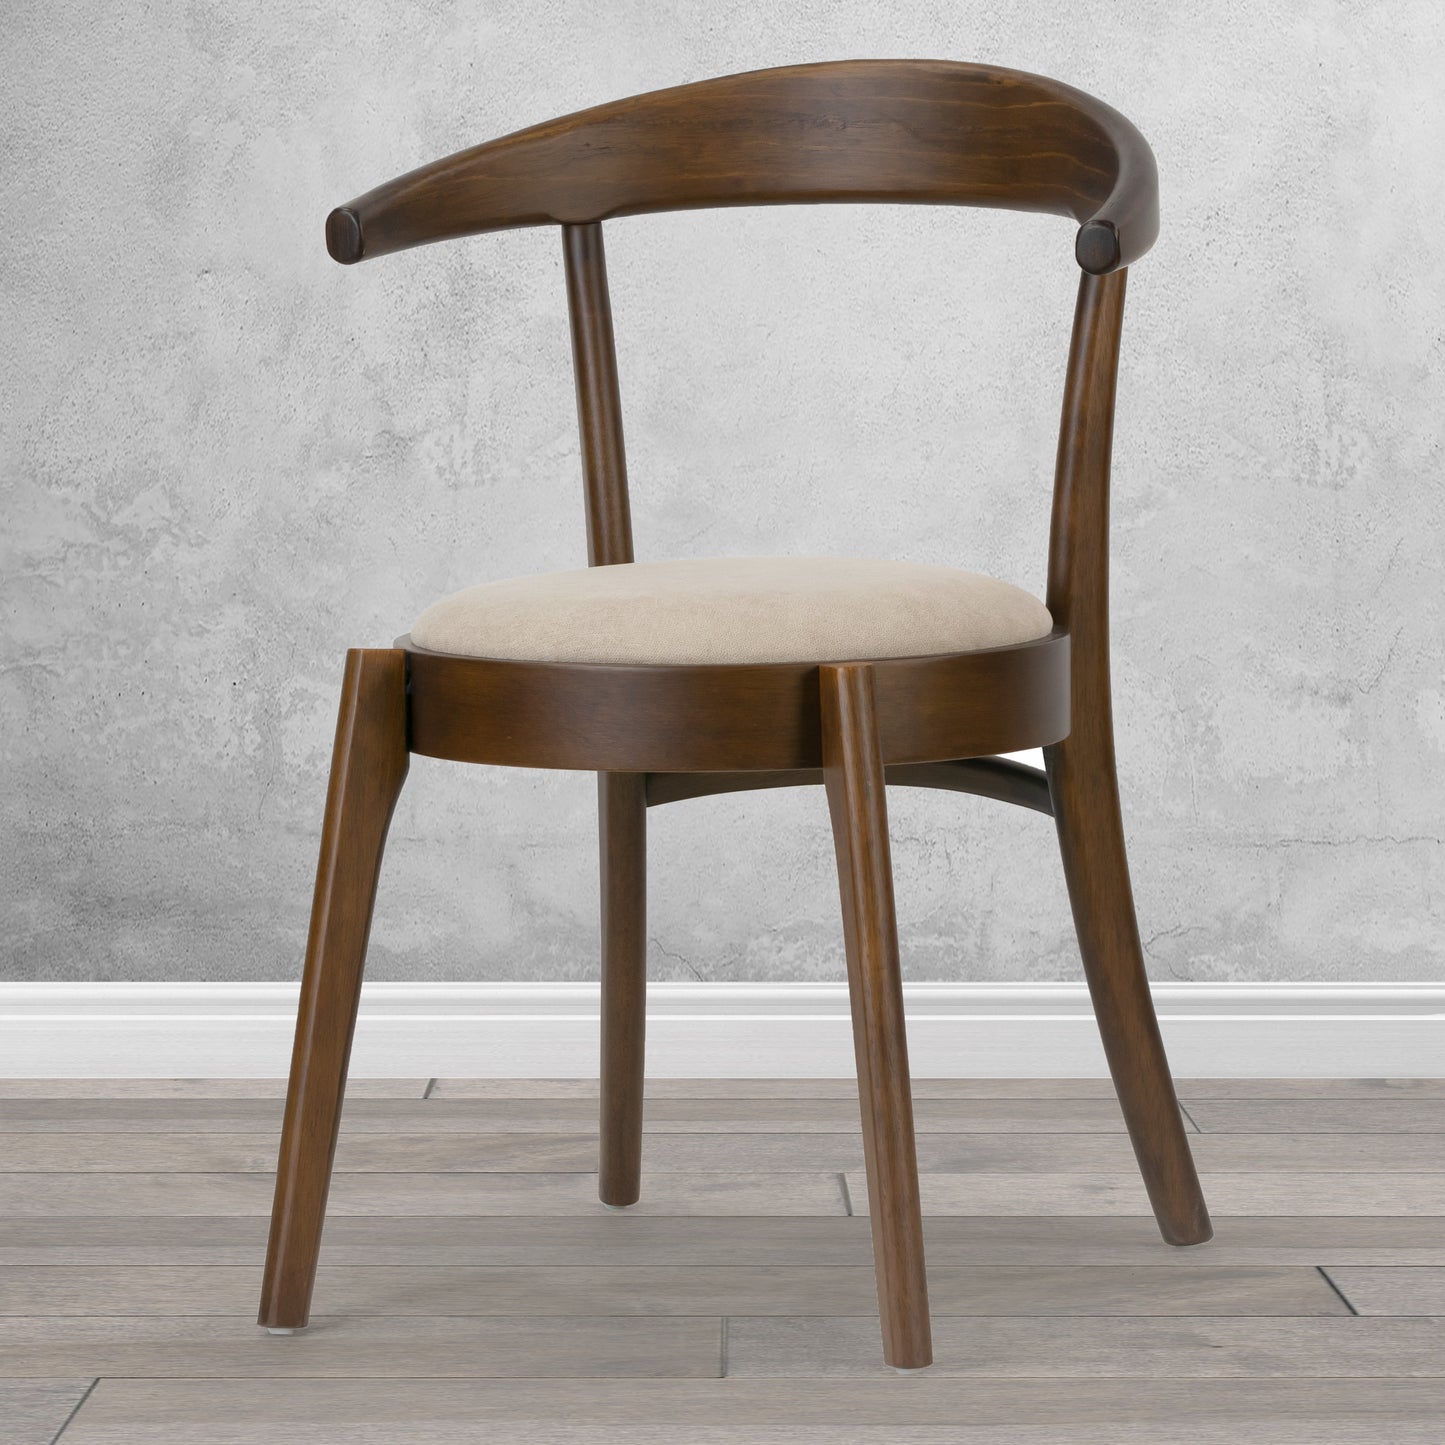 Set of 2 Audra Retro Modern Dark Brown Wood Round Chair with Curved Back